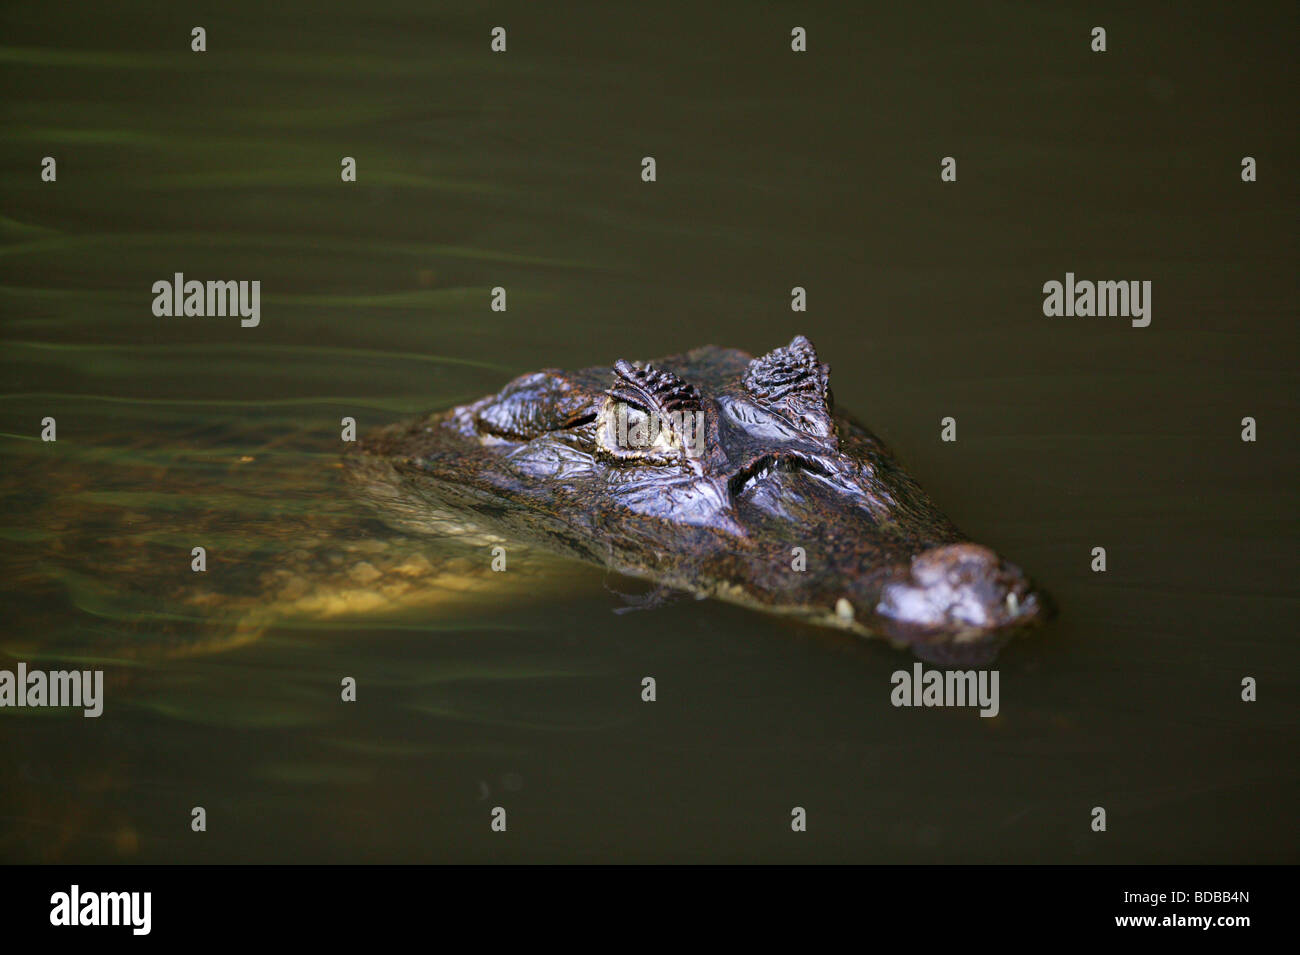 Spectacled Cayman, Caiman crocodilus, in a lake in the rainforest at Isla Bastimentos national park, Bocas del Toro province, Republic of Panama. Stock Photo